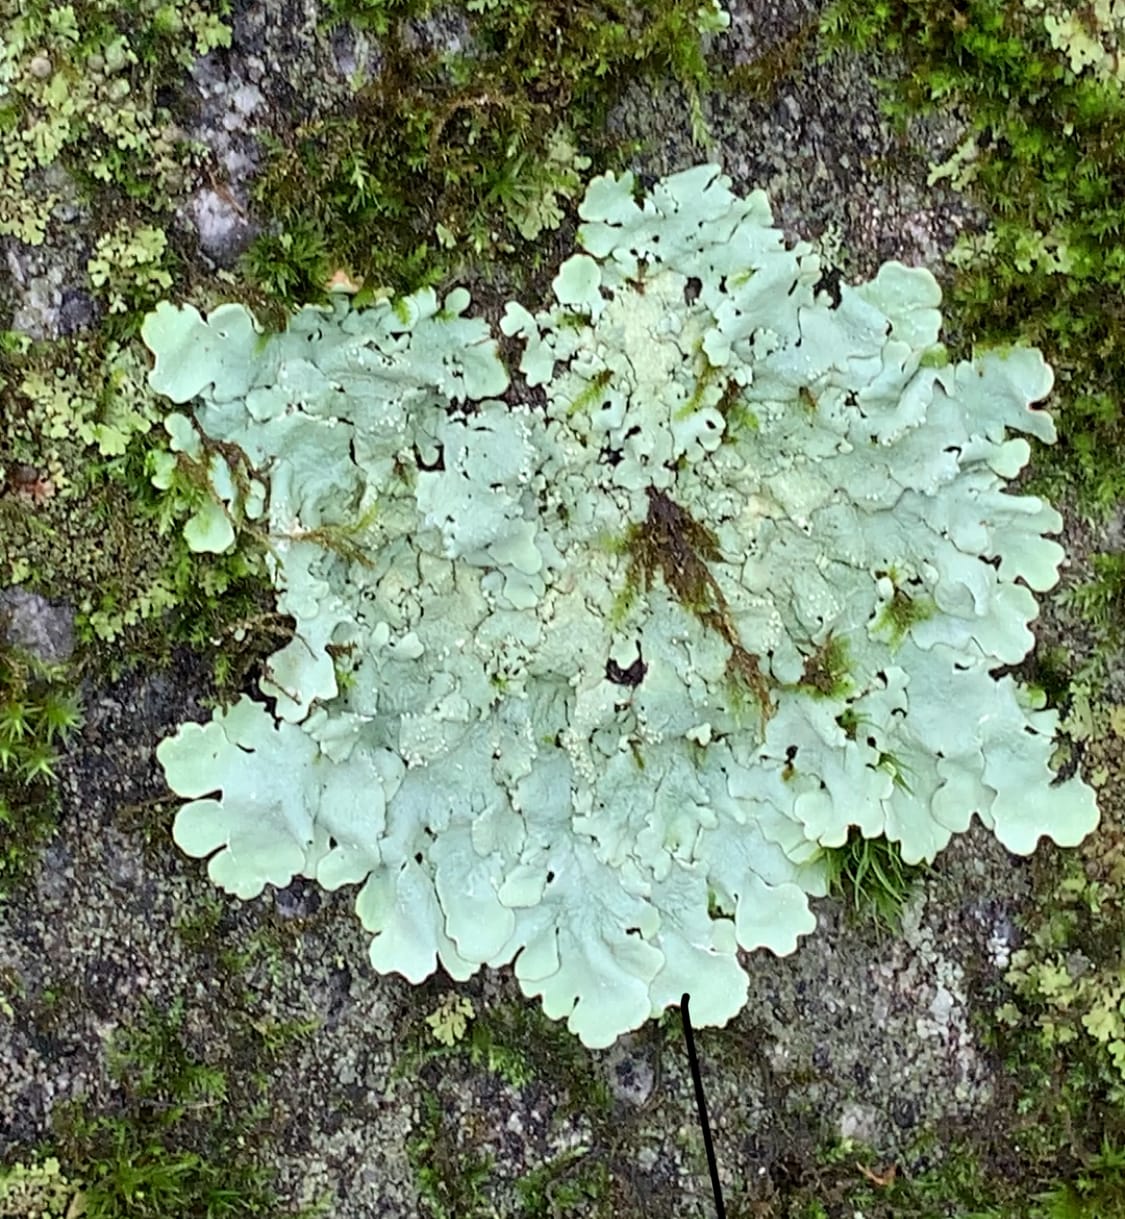 Lichen: It thrives even in places where neither fungus nor algal partner could survive alone